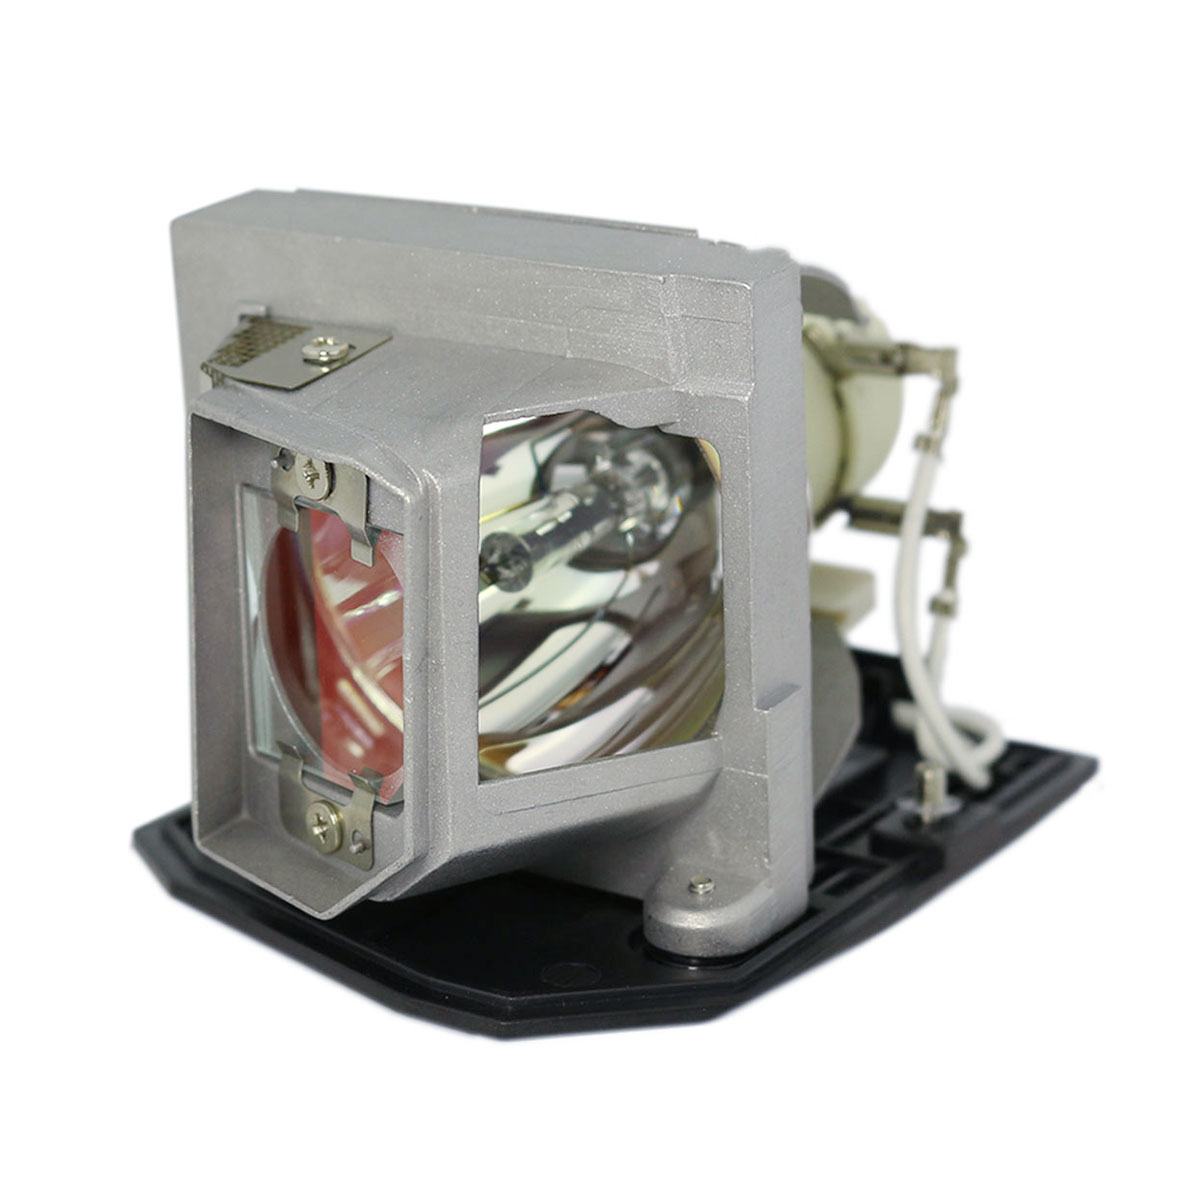 OEM SP.8RU01GC01 Replacement Lamp & Housing for Optoma Projectors - image 2 of 7